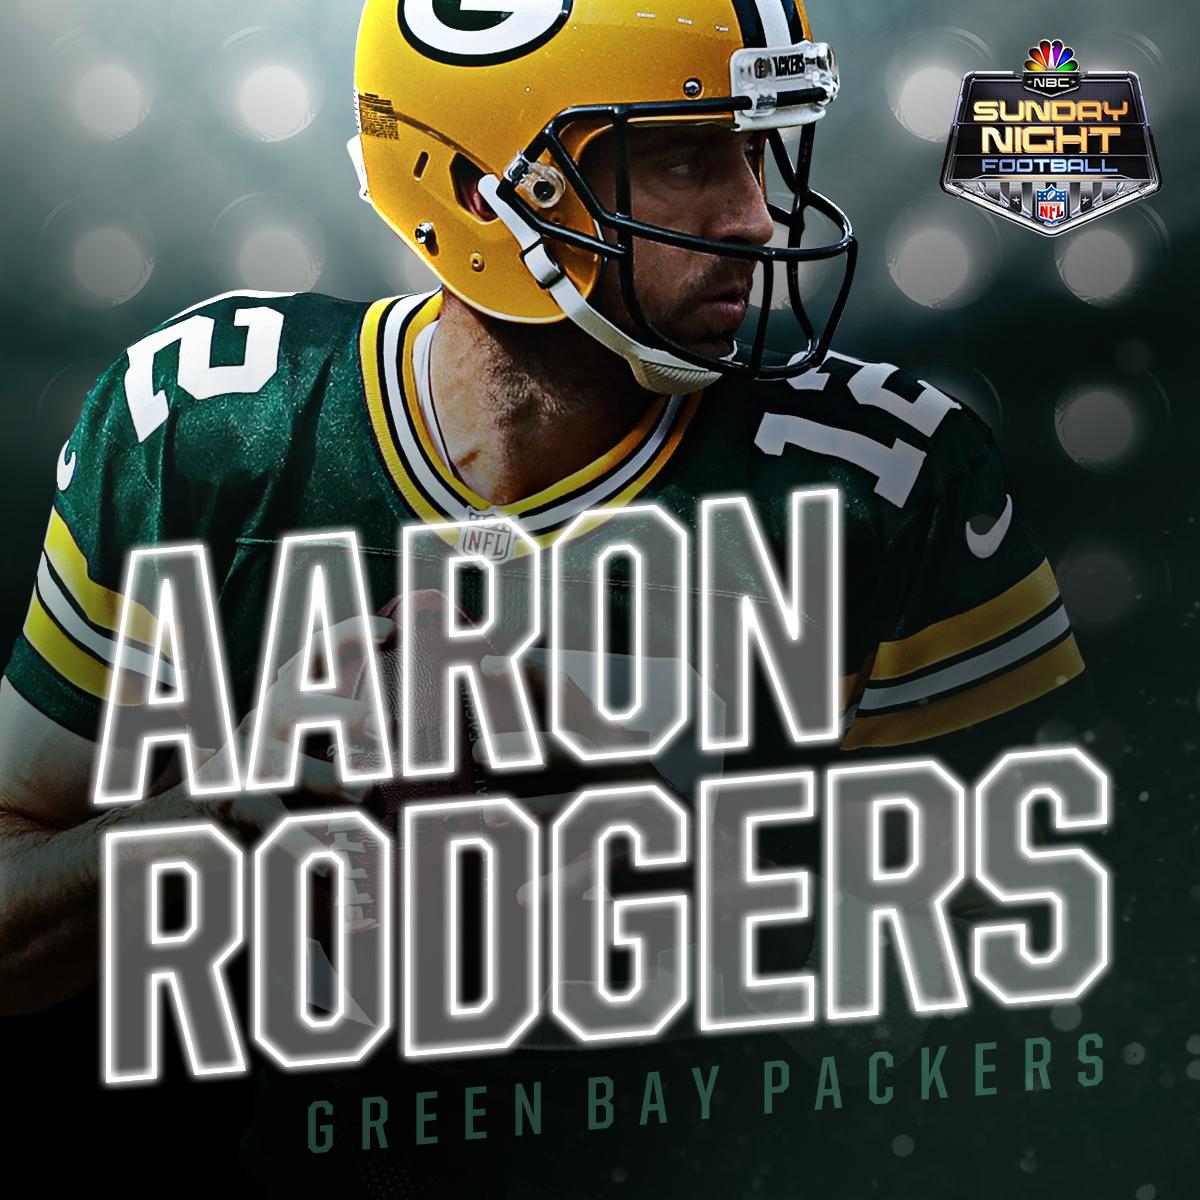 Green Bay Packers on Twitter: '24 hours to #SNF! 